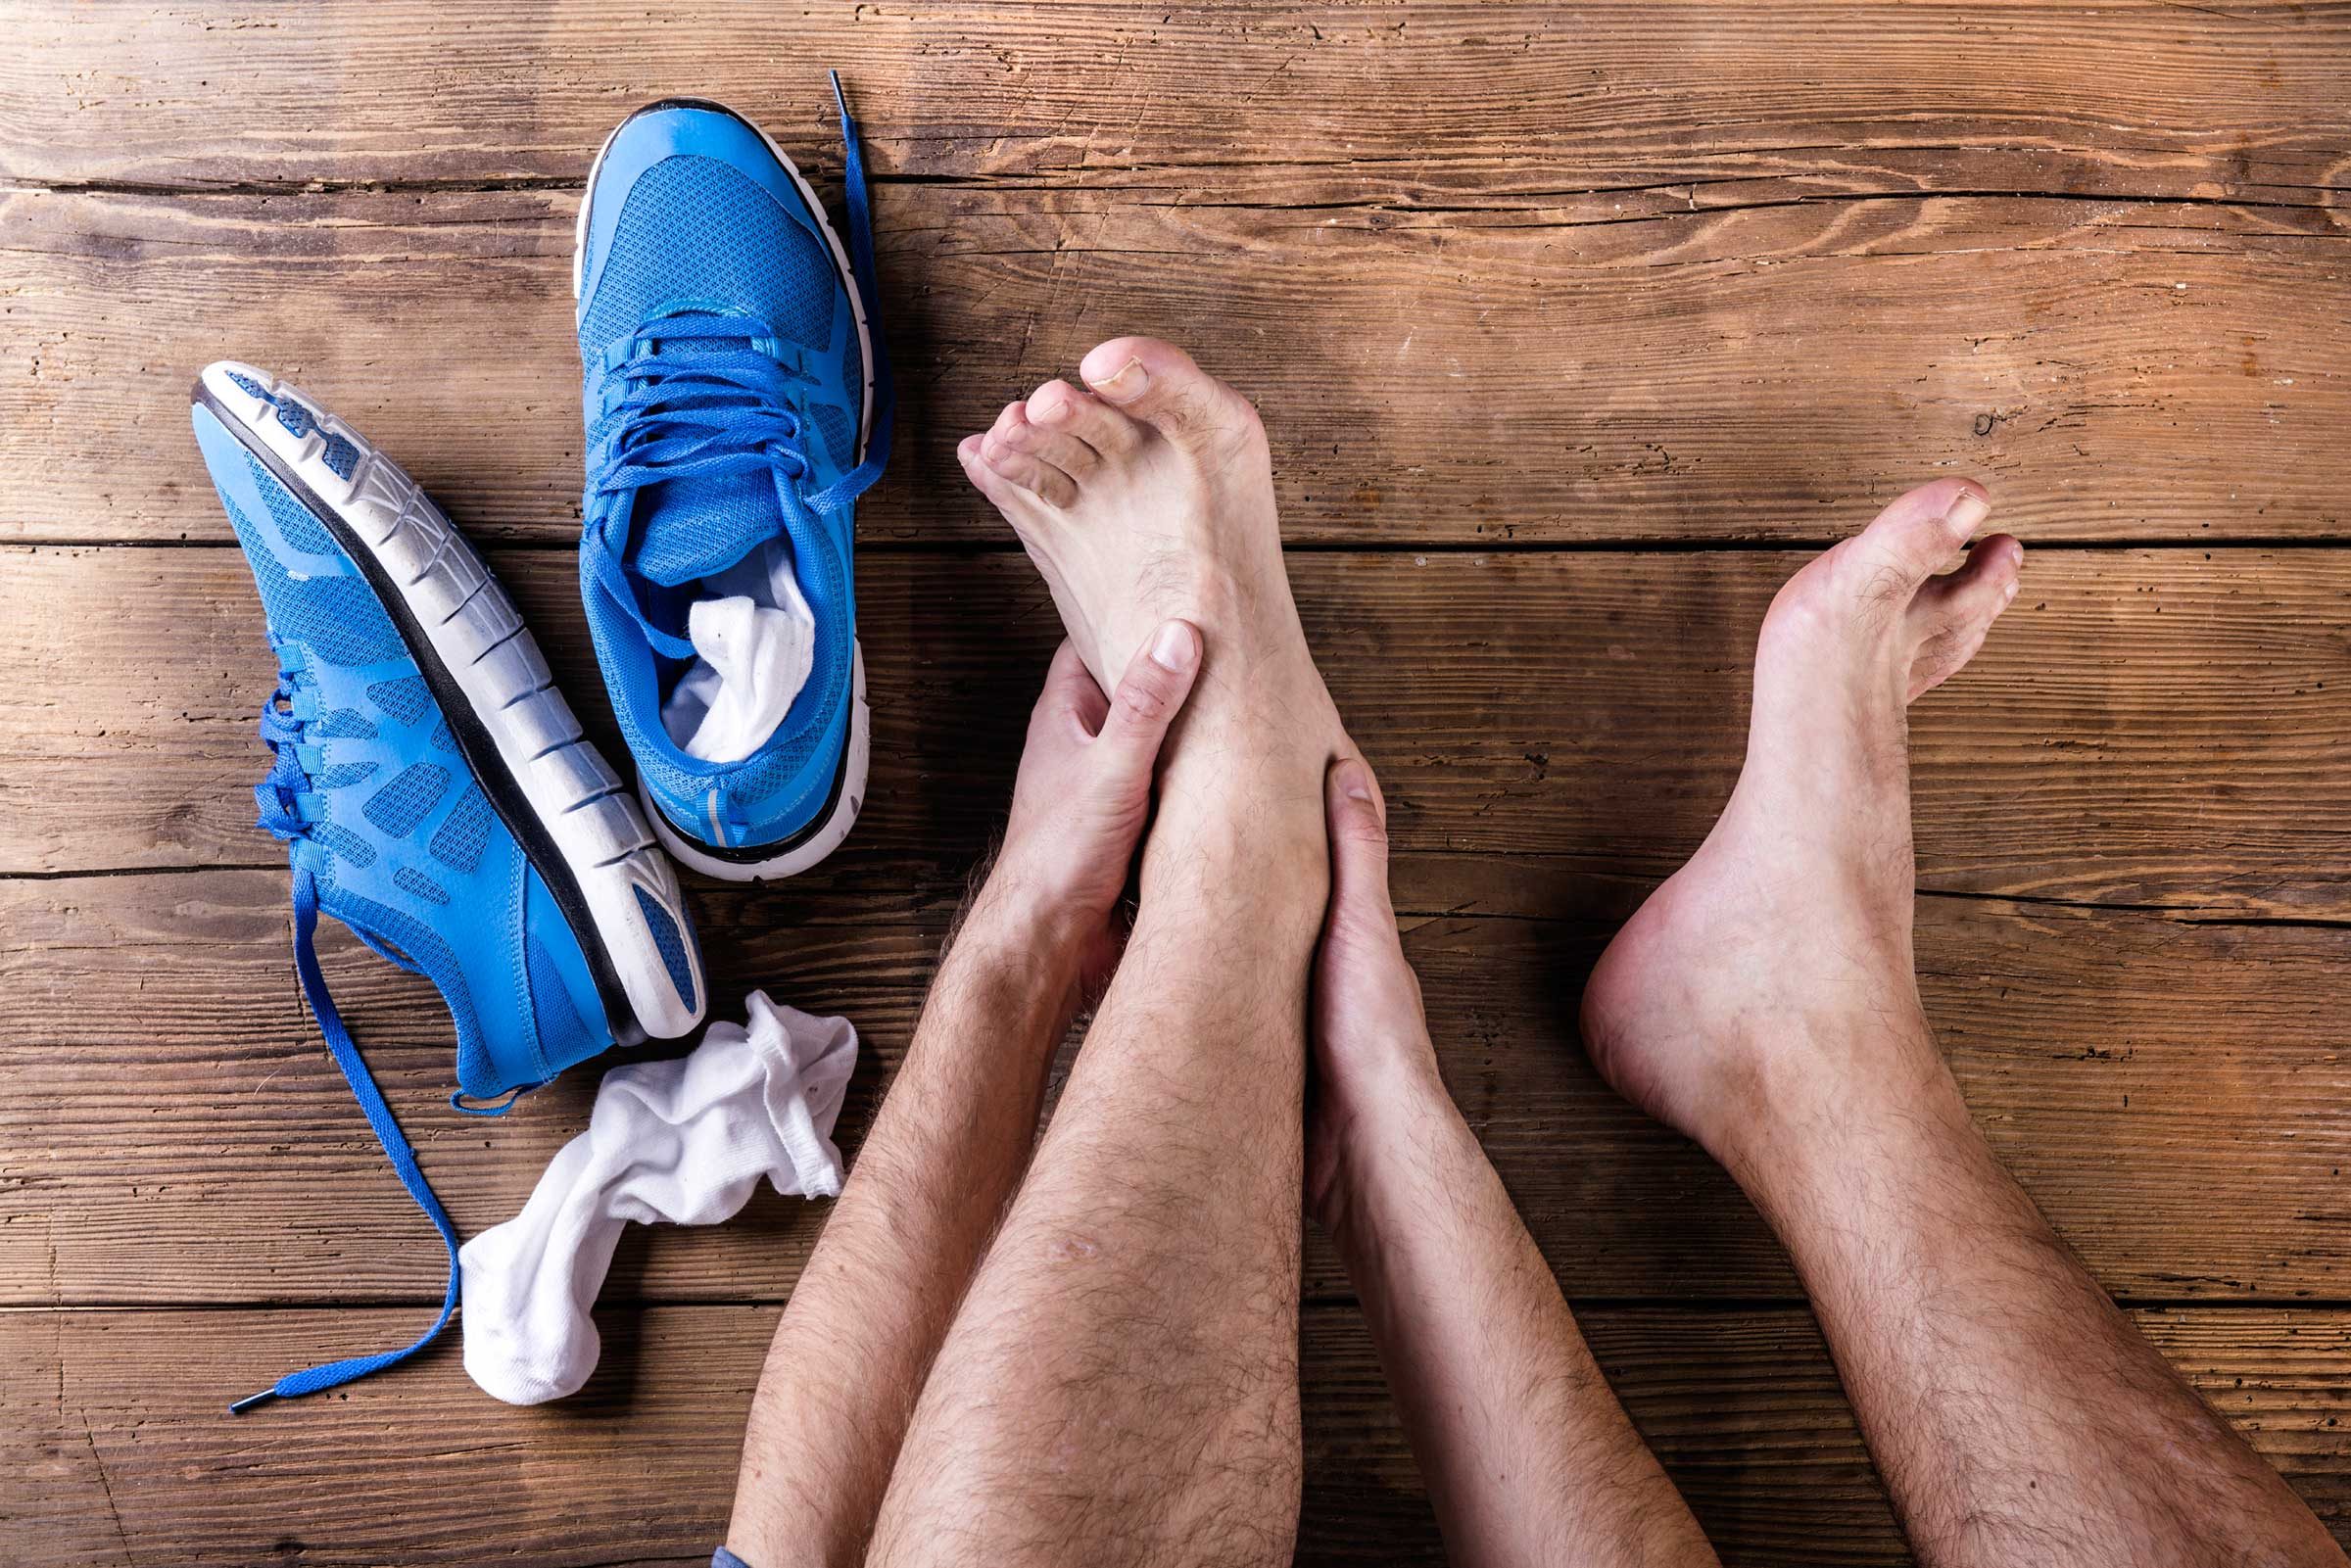 First Aid Tips for a Sprained Ankle | Reader's Digest